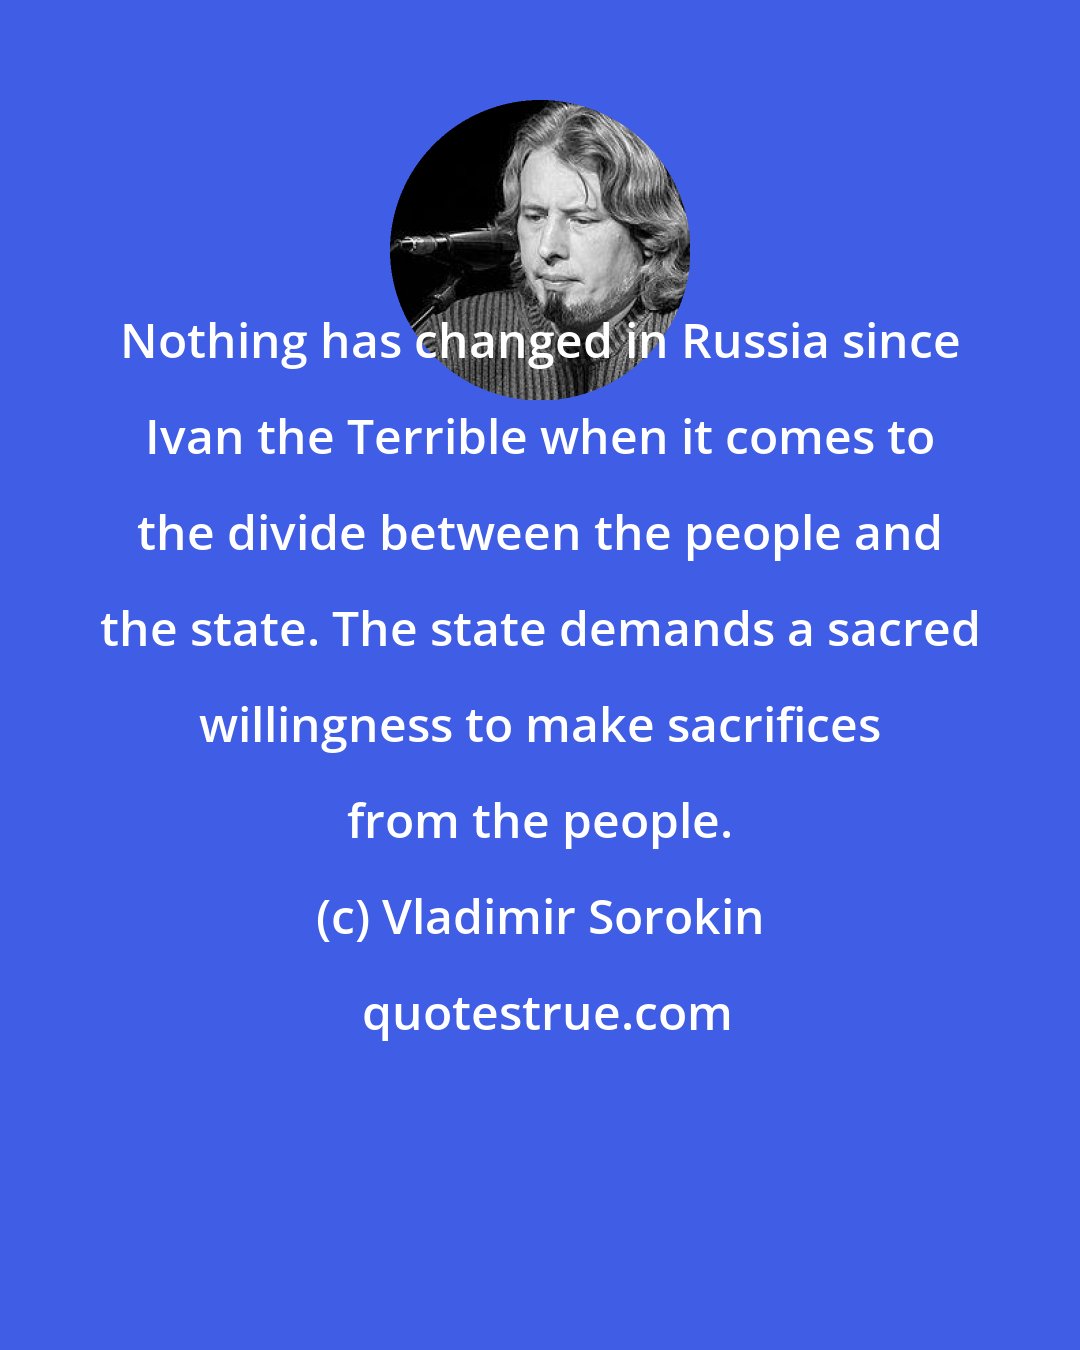 Vladimir Sorokin: Nothing has changed in Russia since Ivan the Terrible when it comes to the divide between the people and the state. The state demands a sacred willingness to make sacrifices from the people.